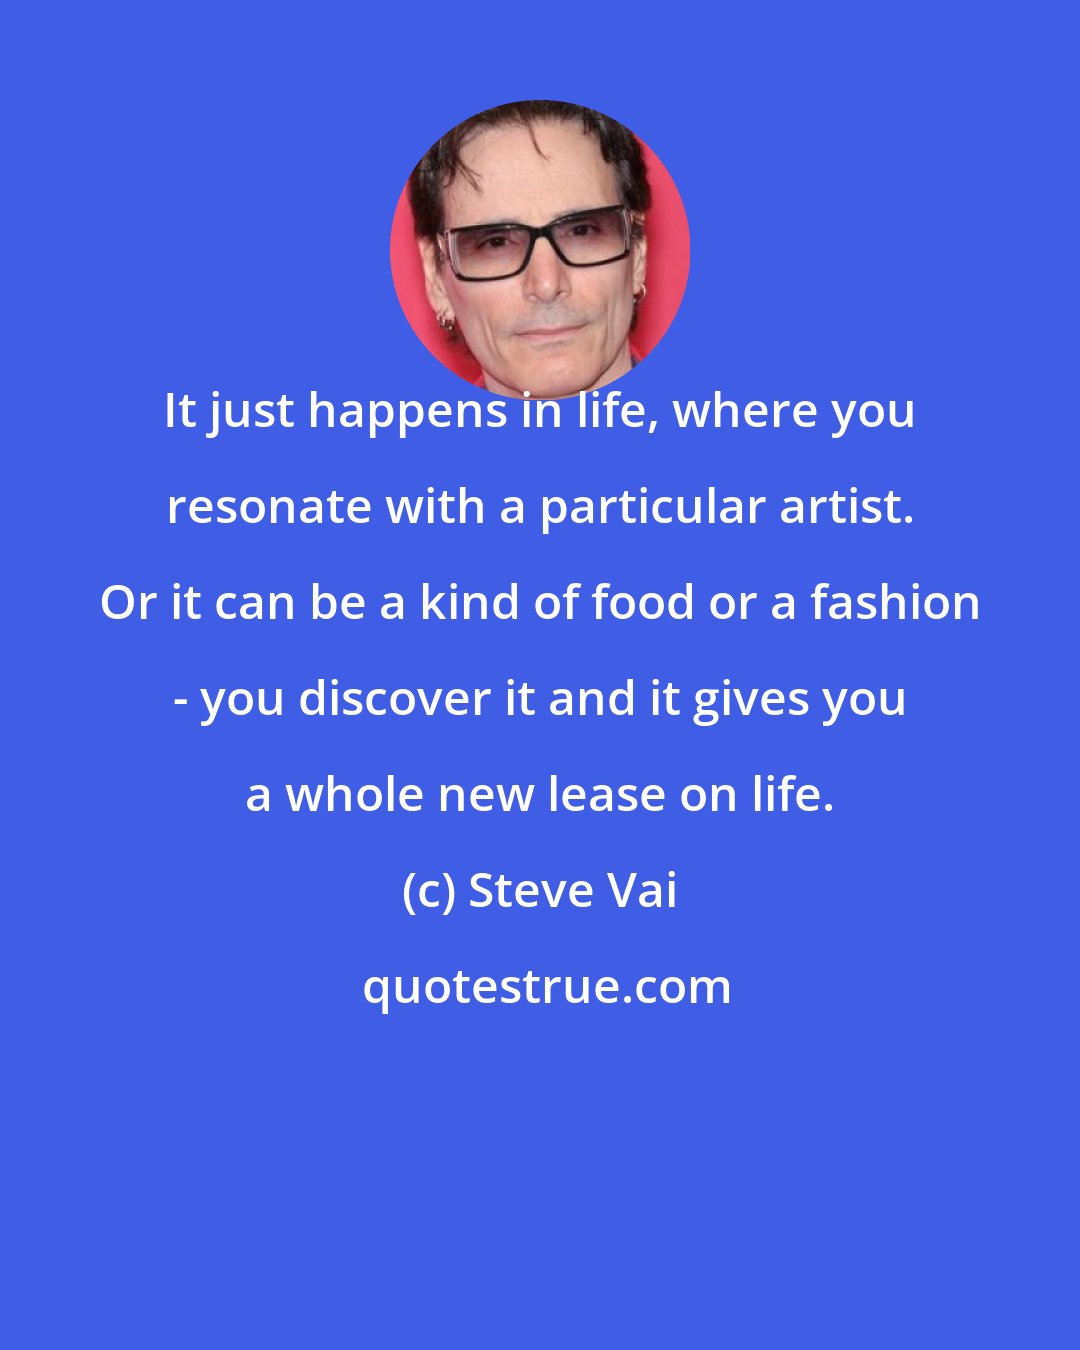 Steve Vai: It just happens in life, where you resonate with a particular artist. Or it can be a kind of food or a fashion - you discover it and it gives you a whole new lease on life.